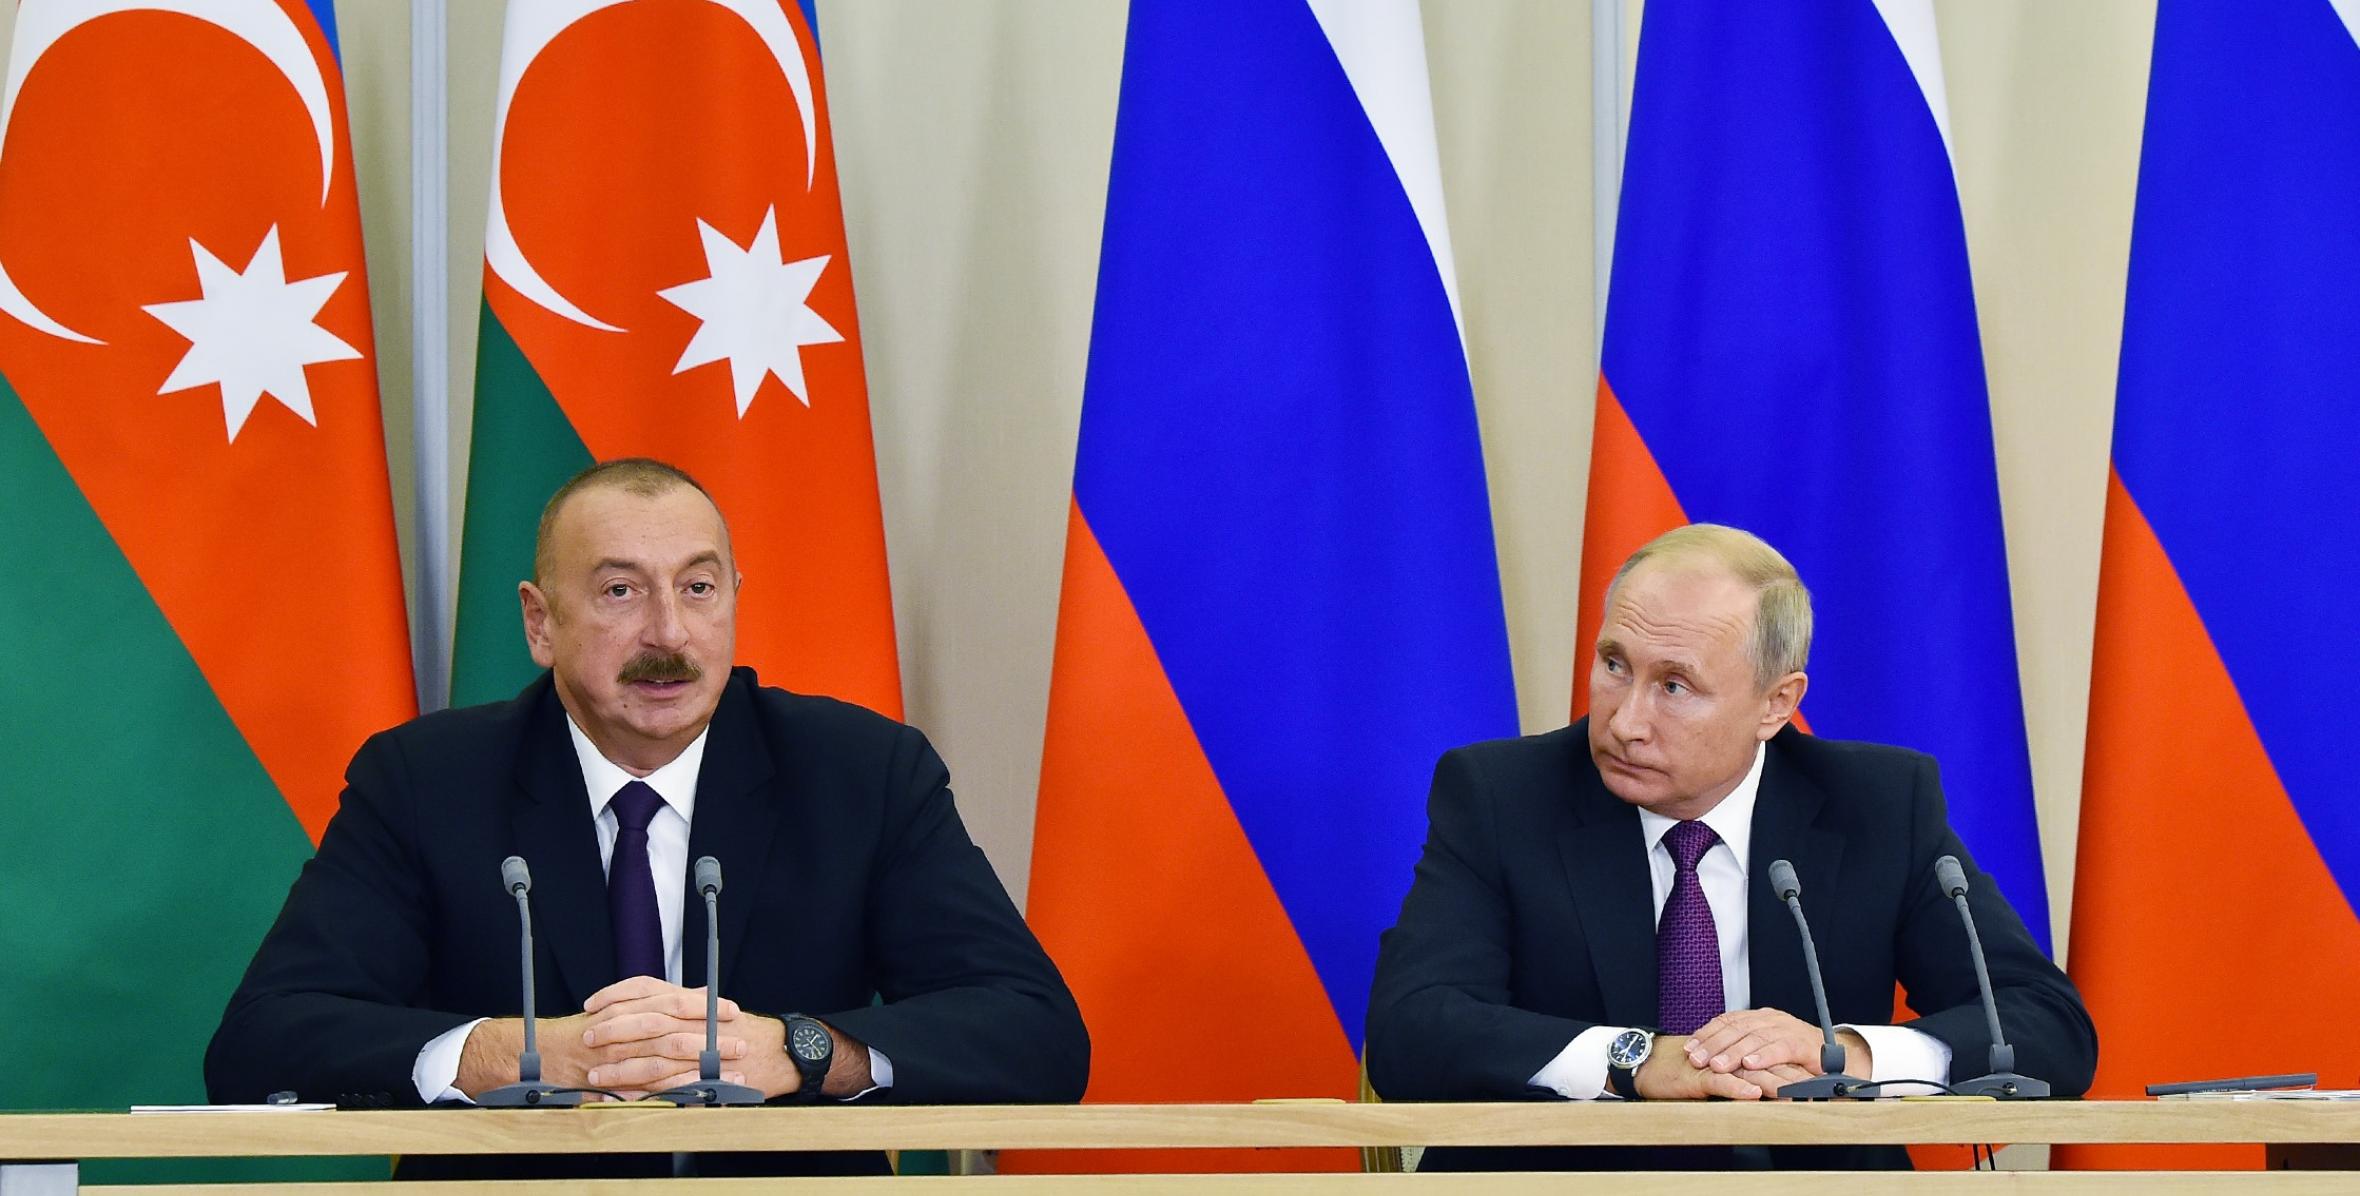 Presidents of Azerbaijan and Russia made press statements